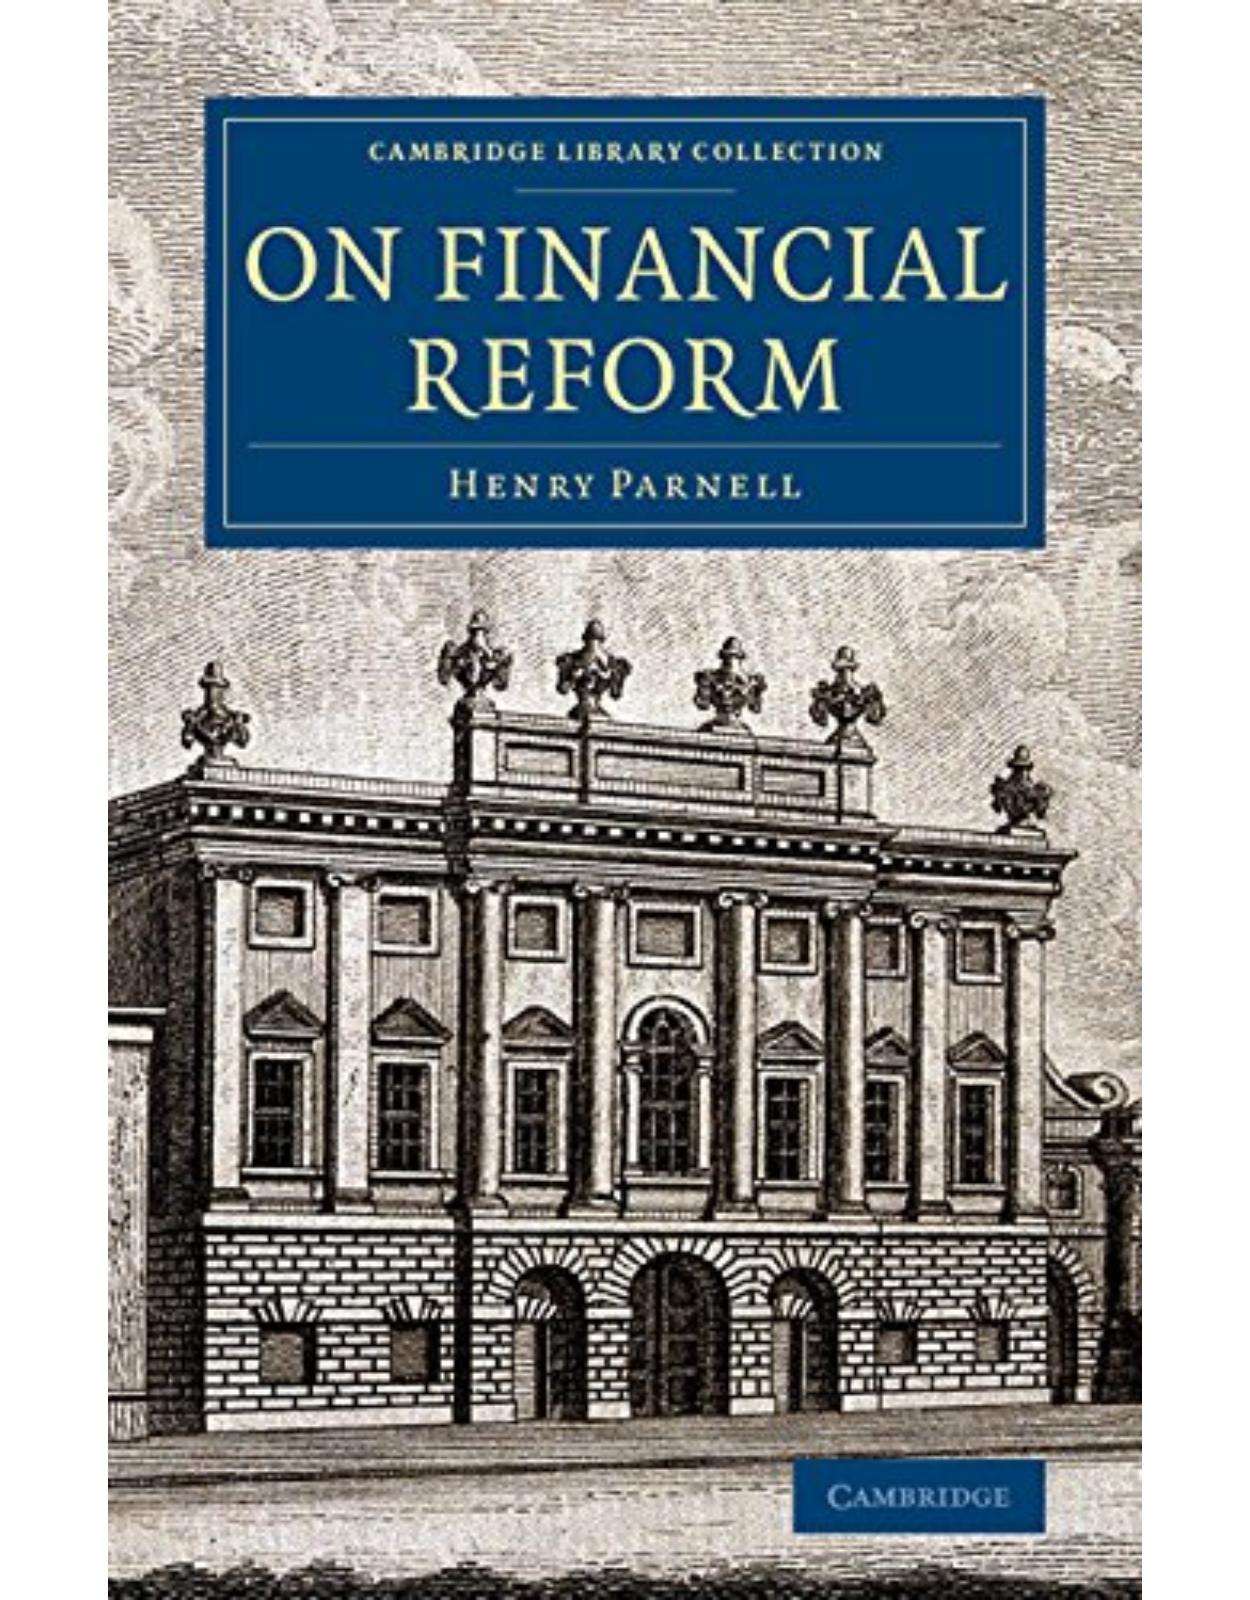 On Financial Reform (Cambridge Library Collection - British and Irish History, 19th Century)